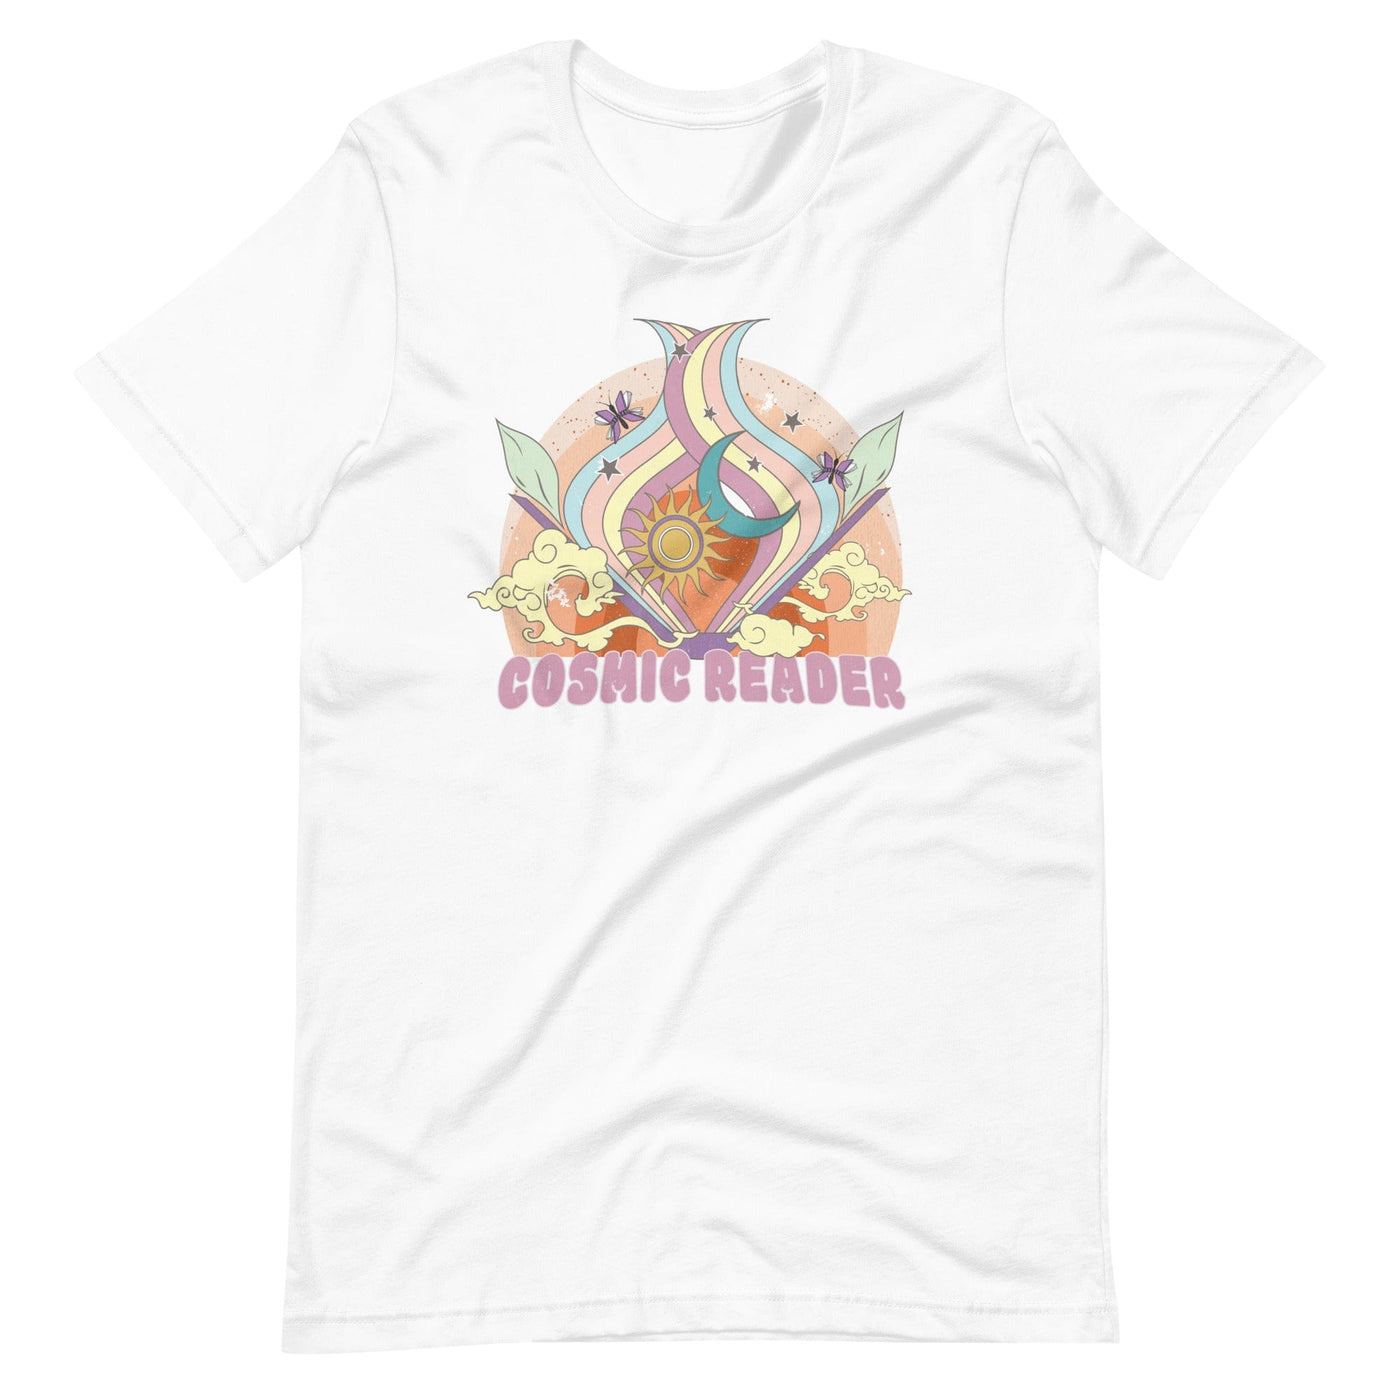 Lit Haven Booktique T-Shirt White / XS Cosmic Reader tee